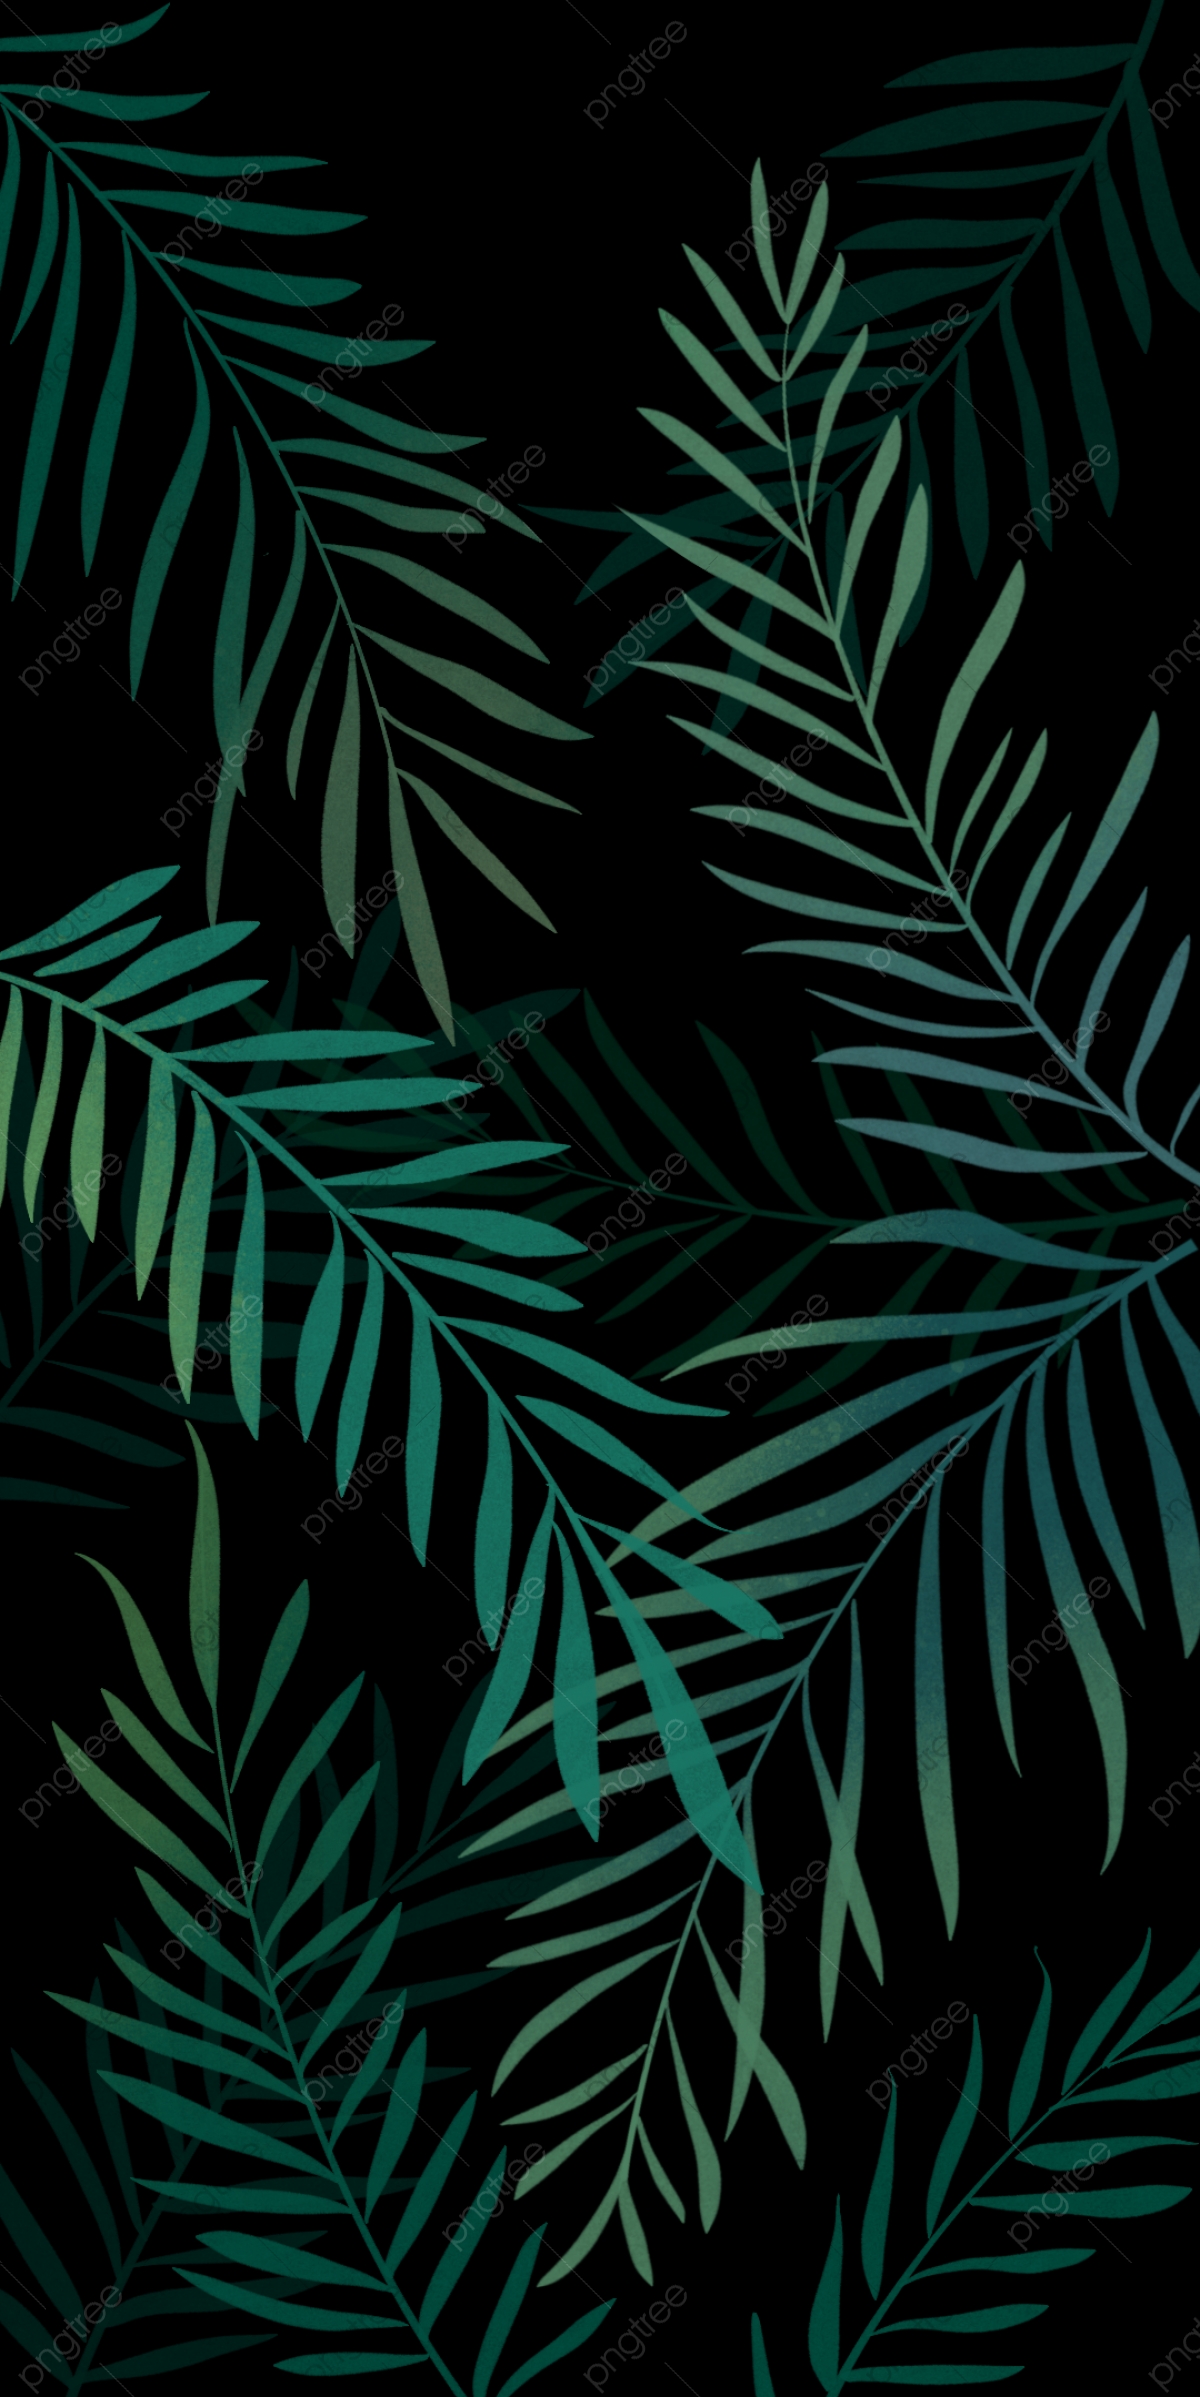 Summer Tropical Leaves Mobile Phone Wallpaper Background, Summer, Leaf, Wallpaper Background Image for Free Download